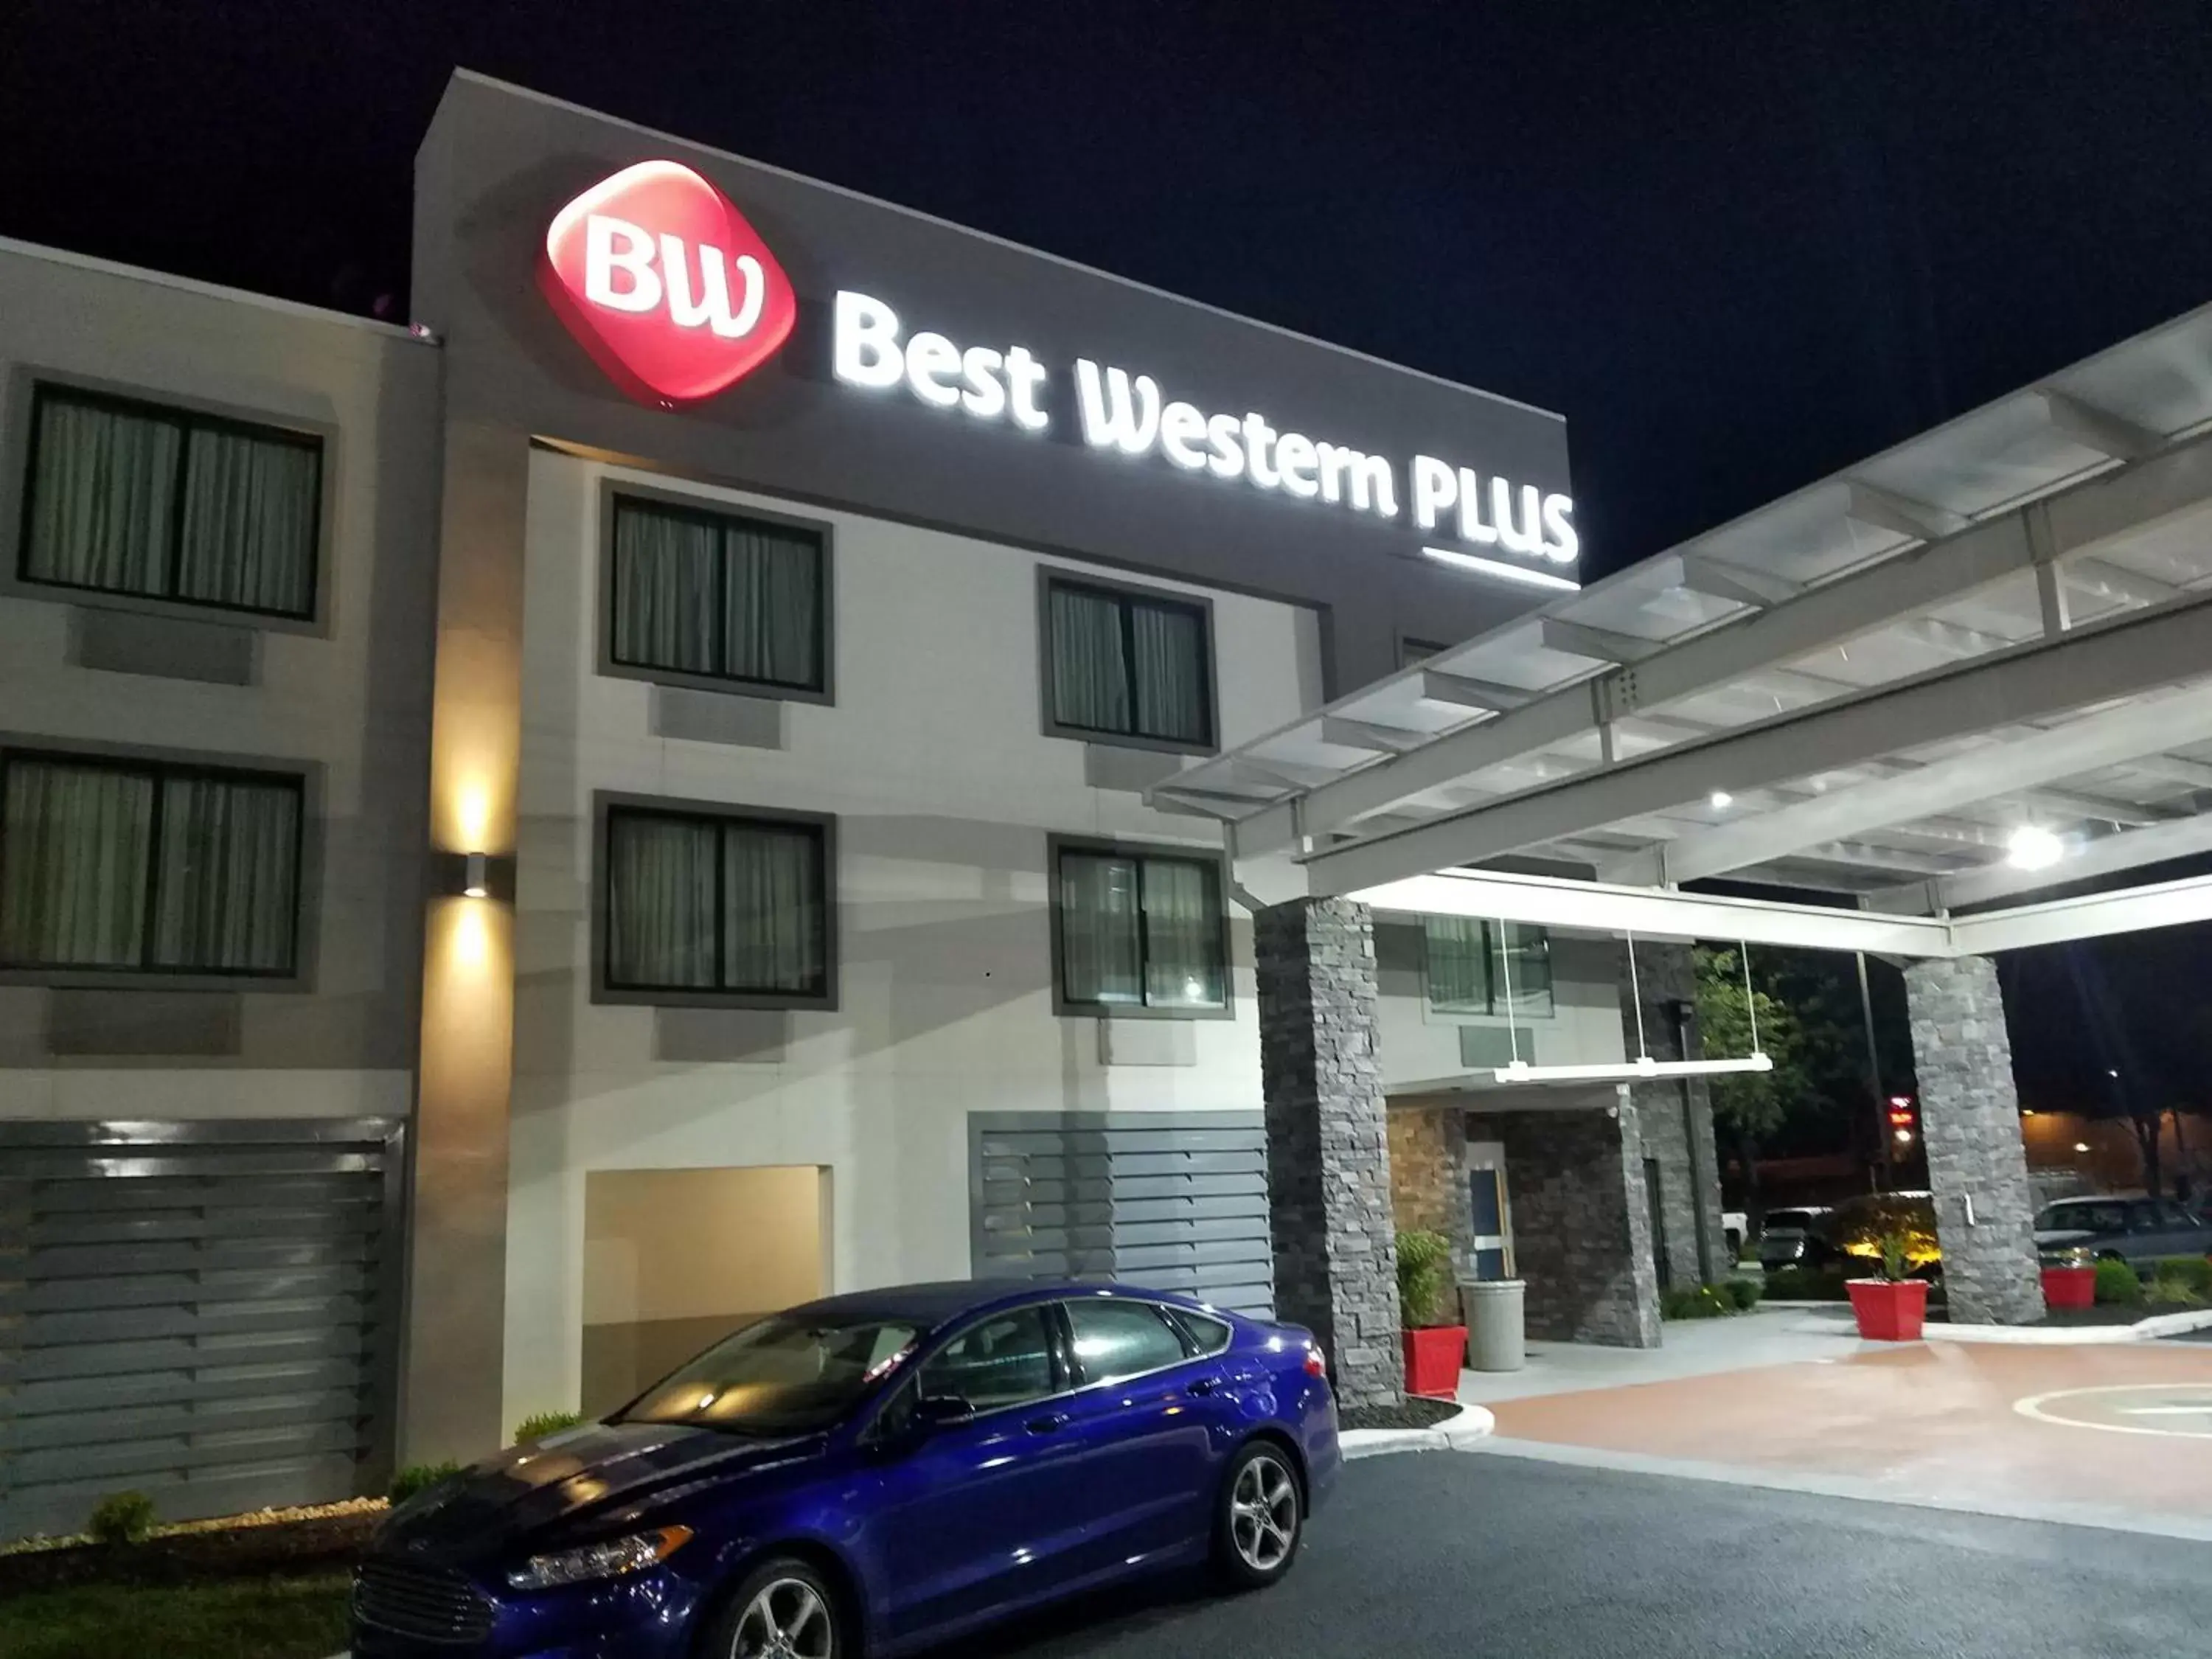 Property Building in Best Western Plus Bowling Green